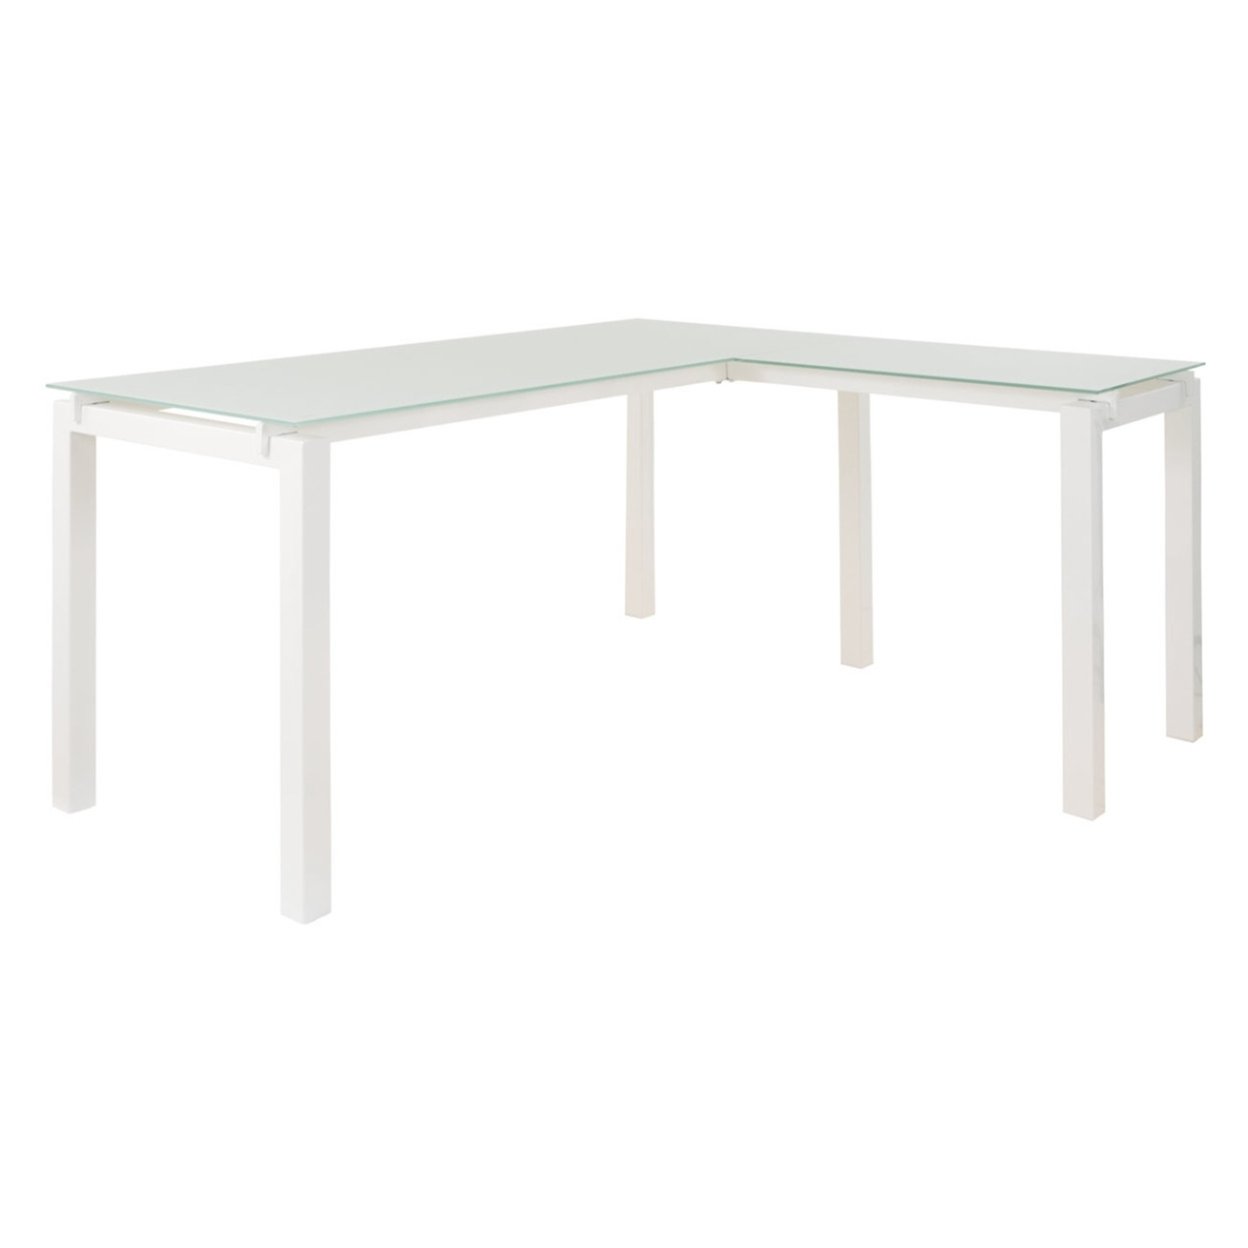 Metal L Shape Desk With Frosted Glass Top And Block Legs, White- Saltoro Sherpi